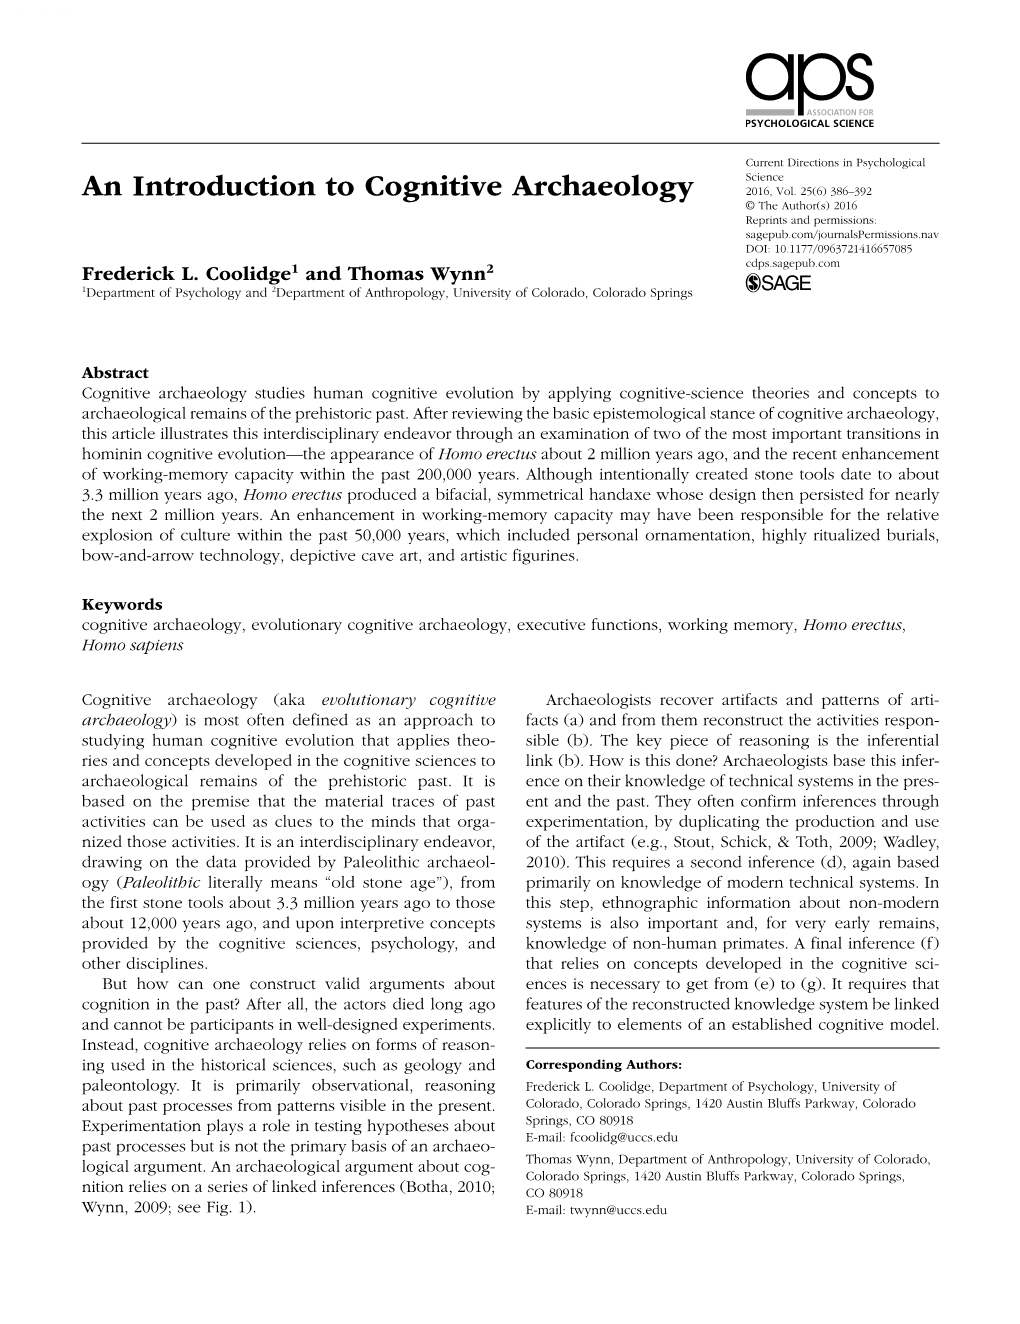 An Introduction to Cognitive Archaeology Research-Article6570852016